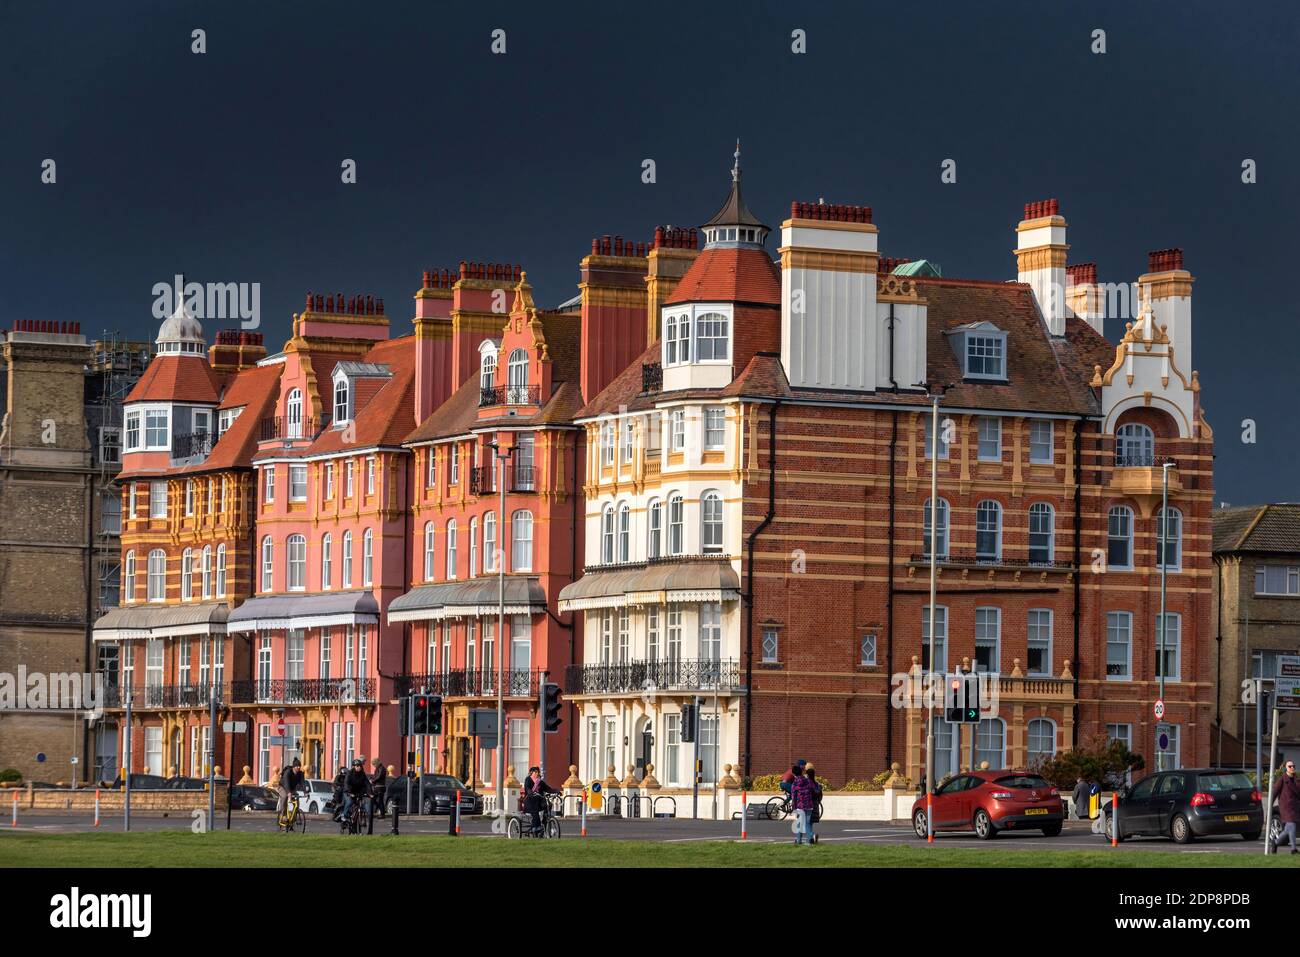 Brighton, December 19th 2020: Stormy and changeable conditions on the seafront in Hove this afternoon Credit: Andrew Hasson/Alamy Live News Stock Photo